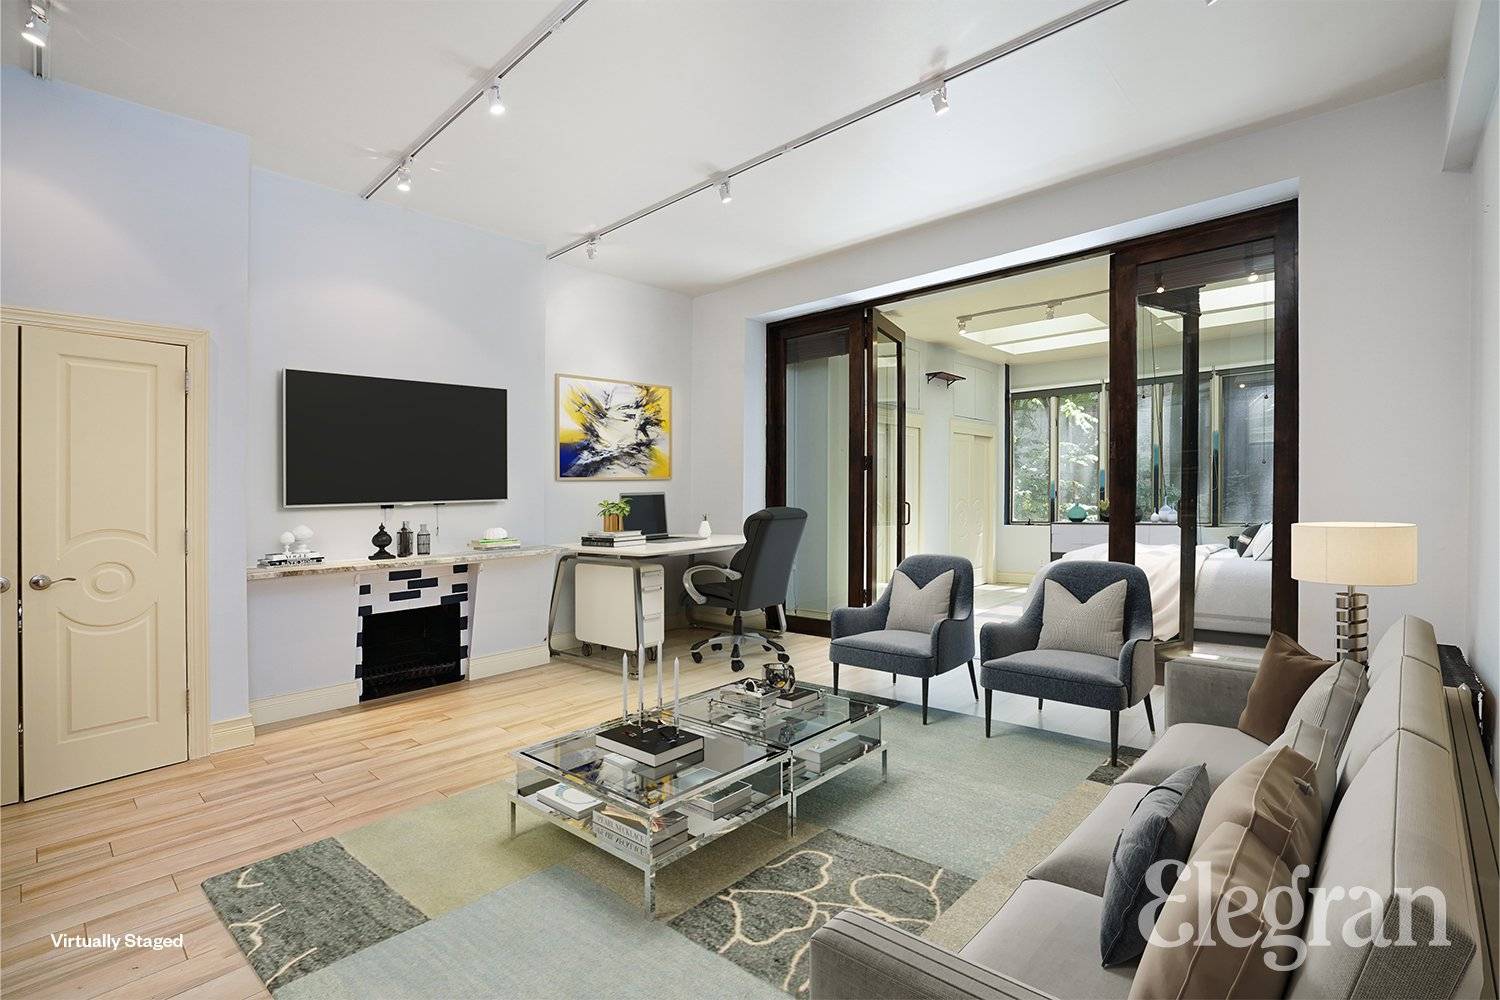 Centrally located between Park and Madison Avenue, this sprawling one bedroom apartment is truly a rare find in the Murray Hill Midtown area.